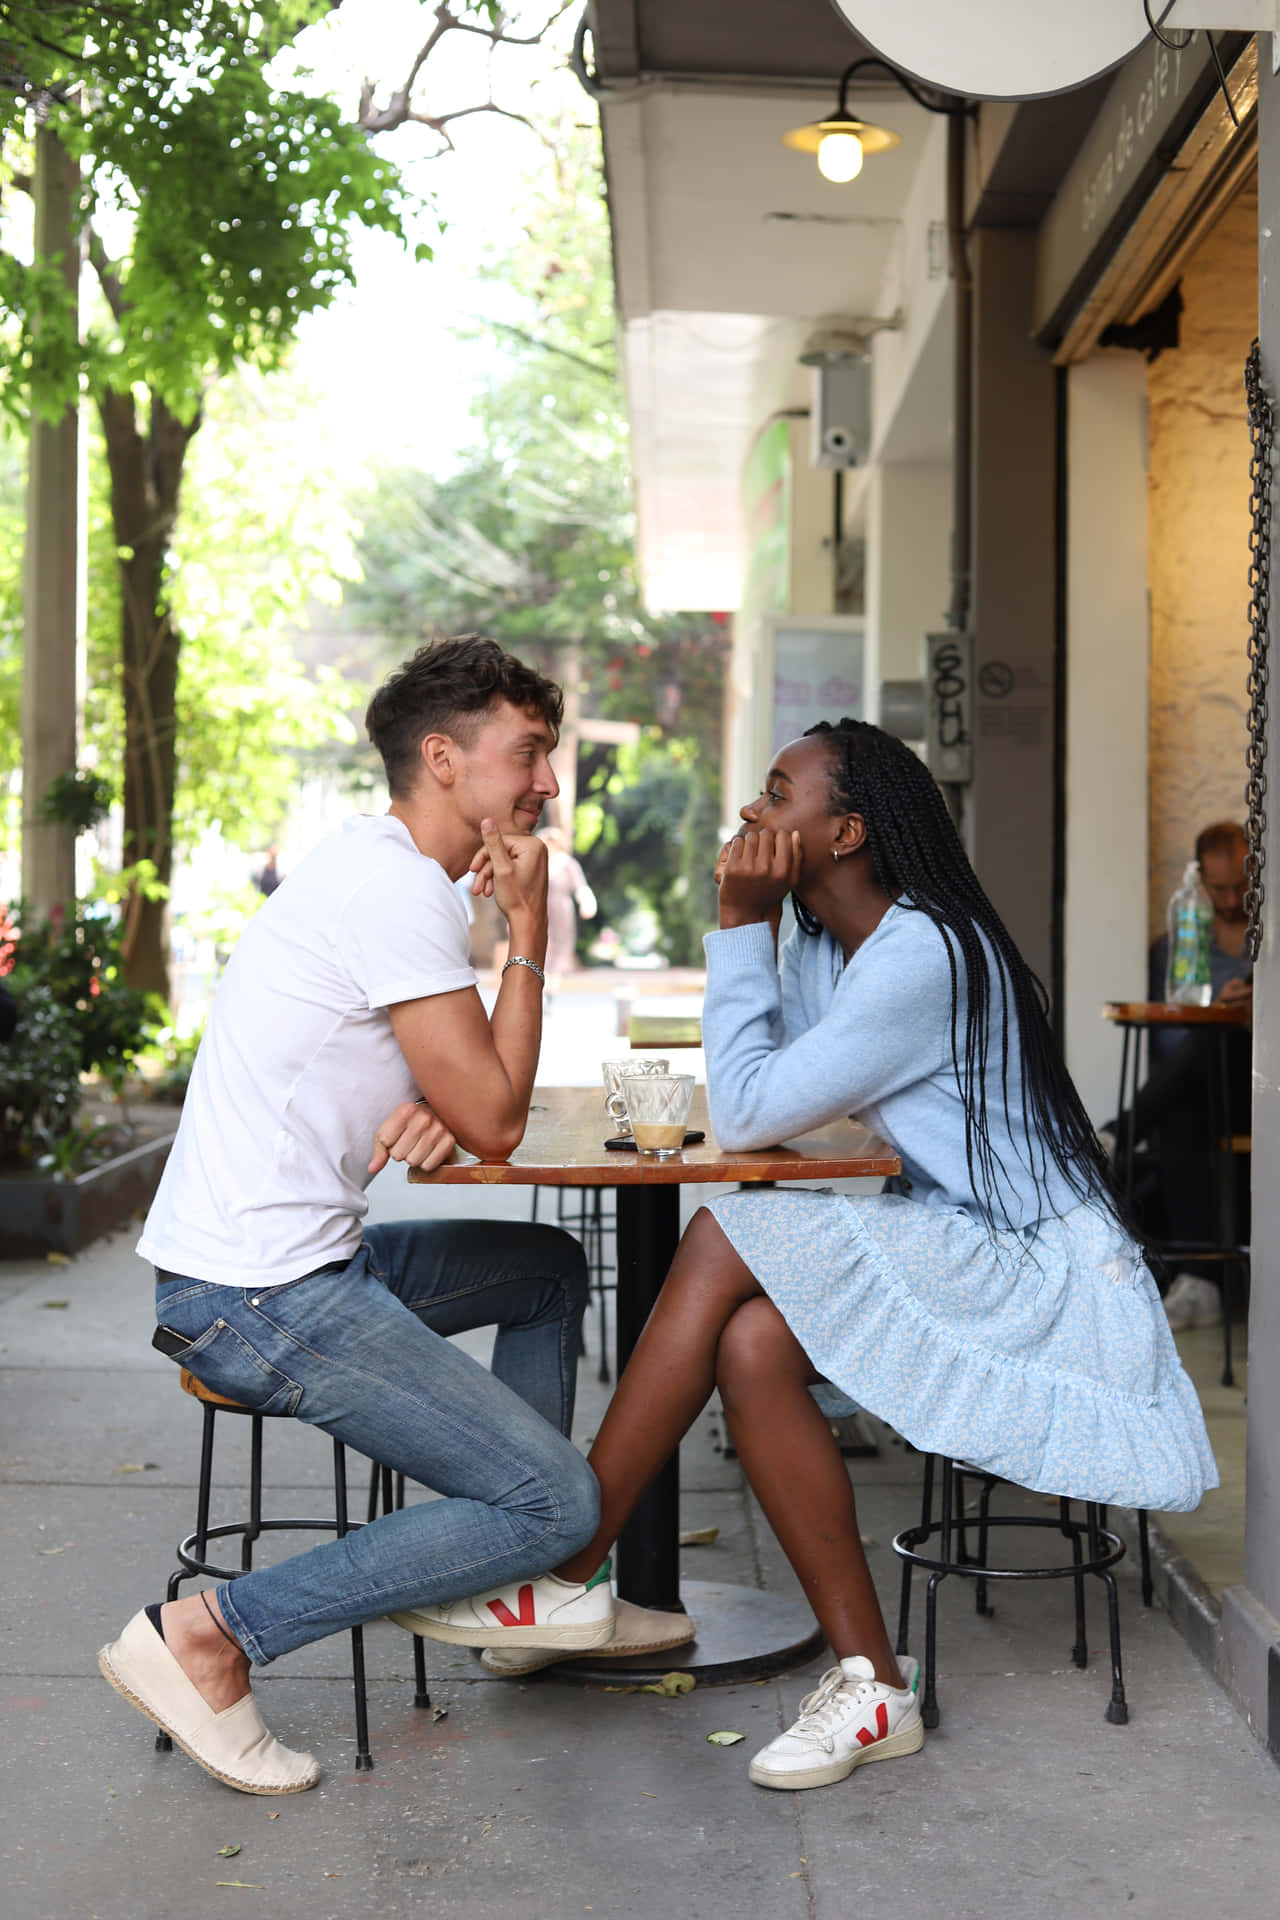 Interracial Couple On Cafe Date Wallpaper